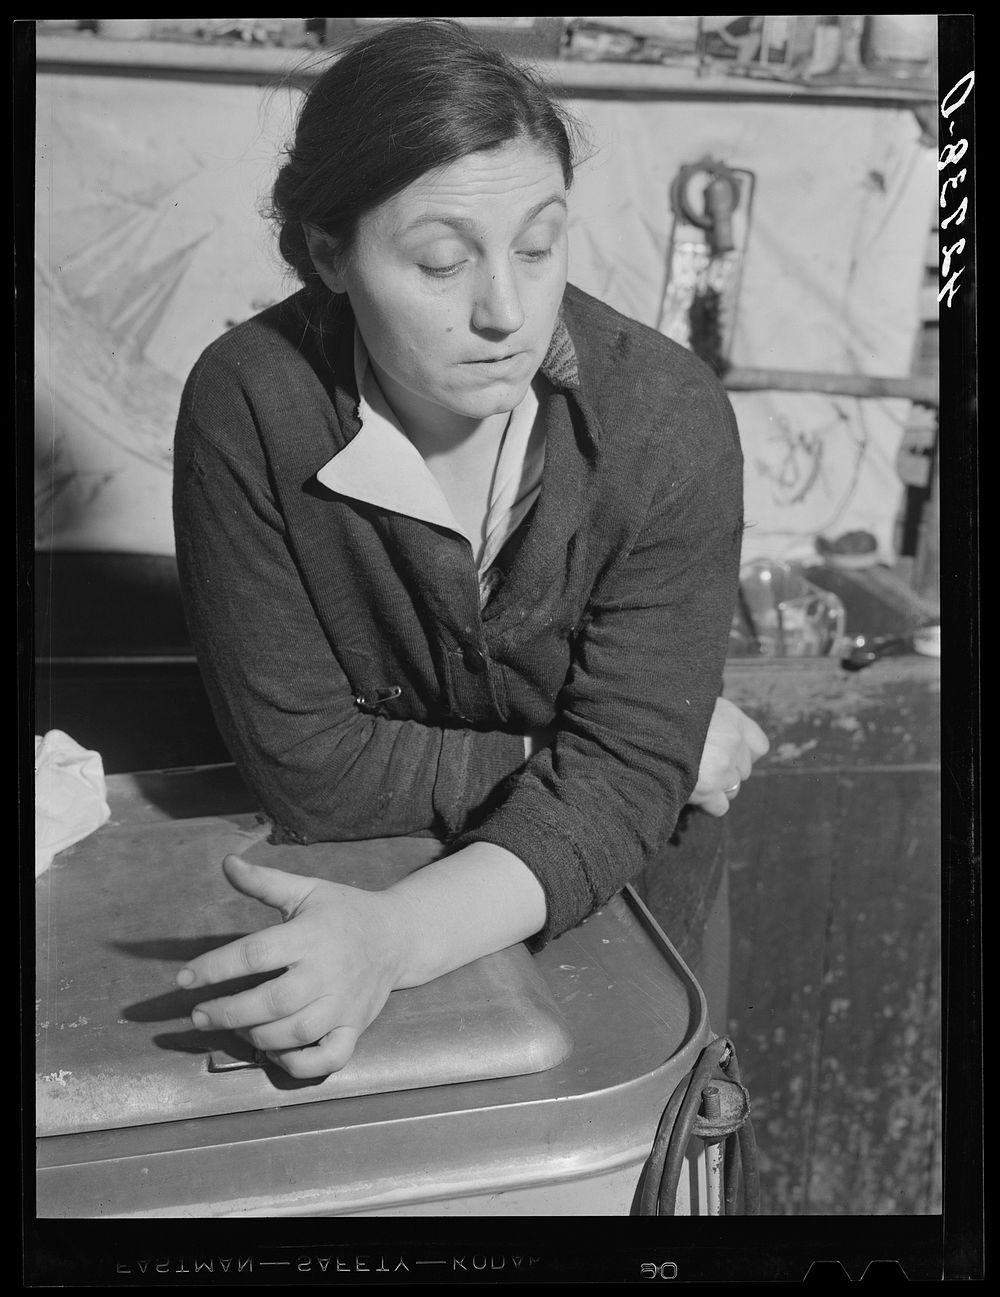 Wife of a Portuguese farmer who works part-time at a Naval base. Near Tiverton, Rhode Island. Sourced from the Library of…